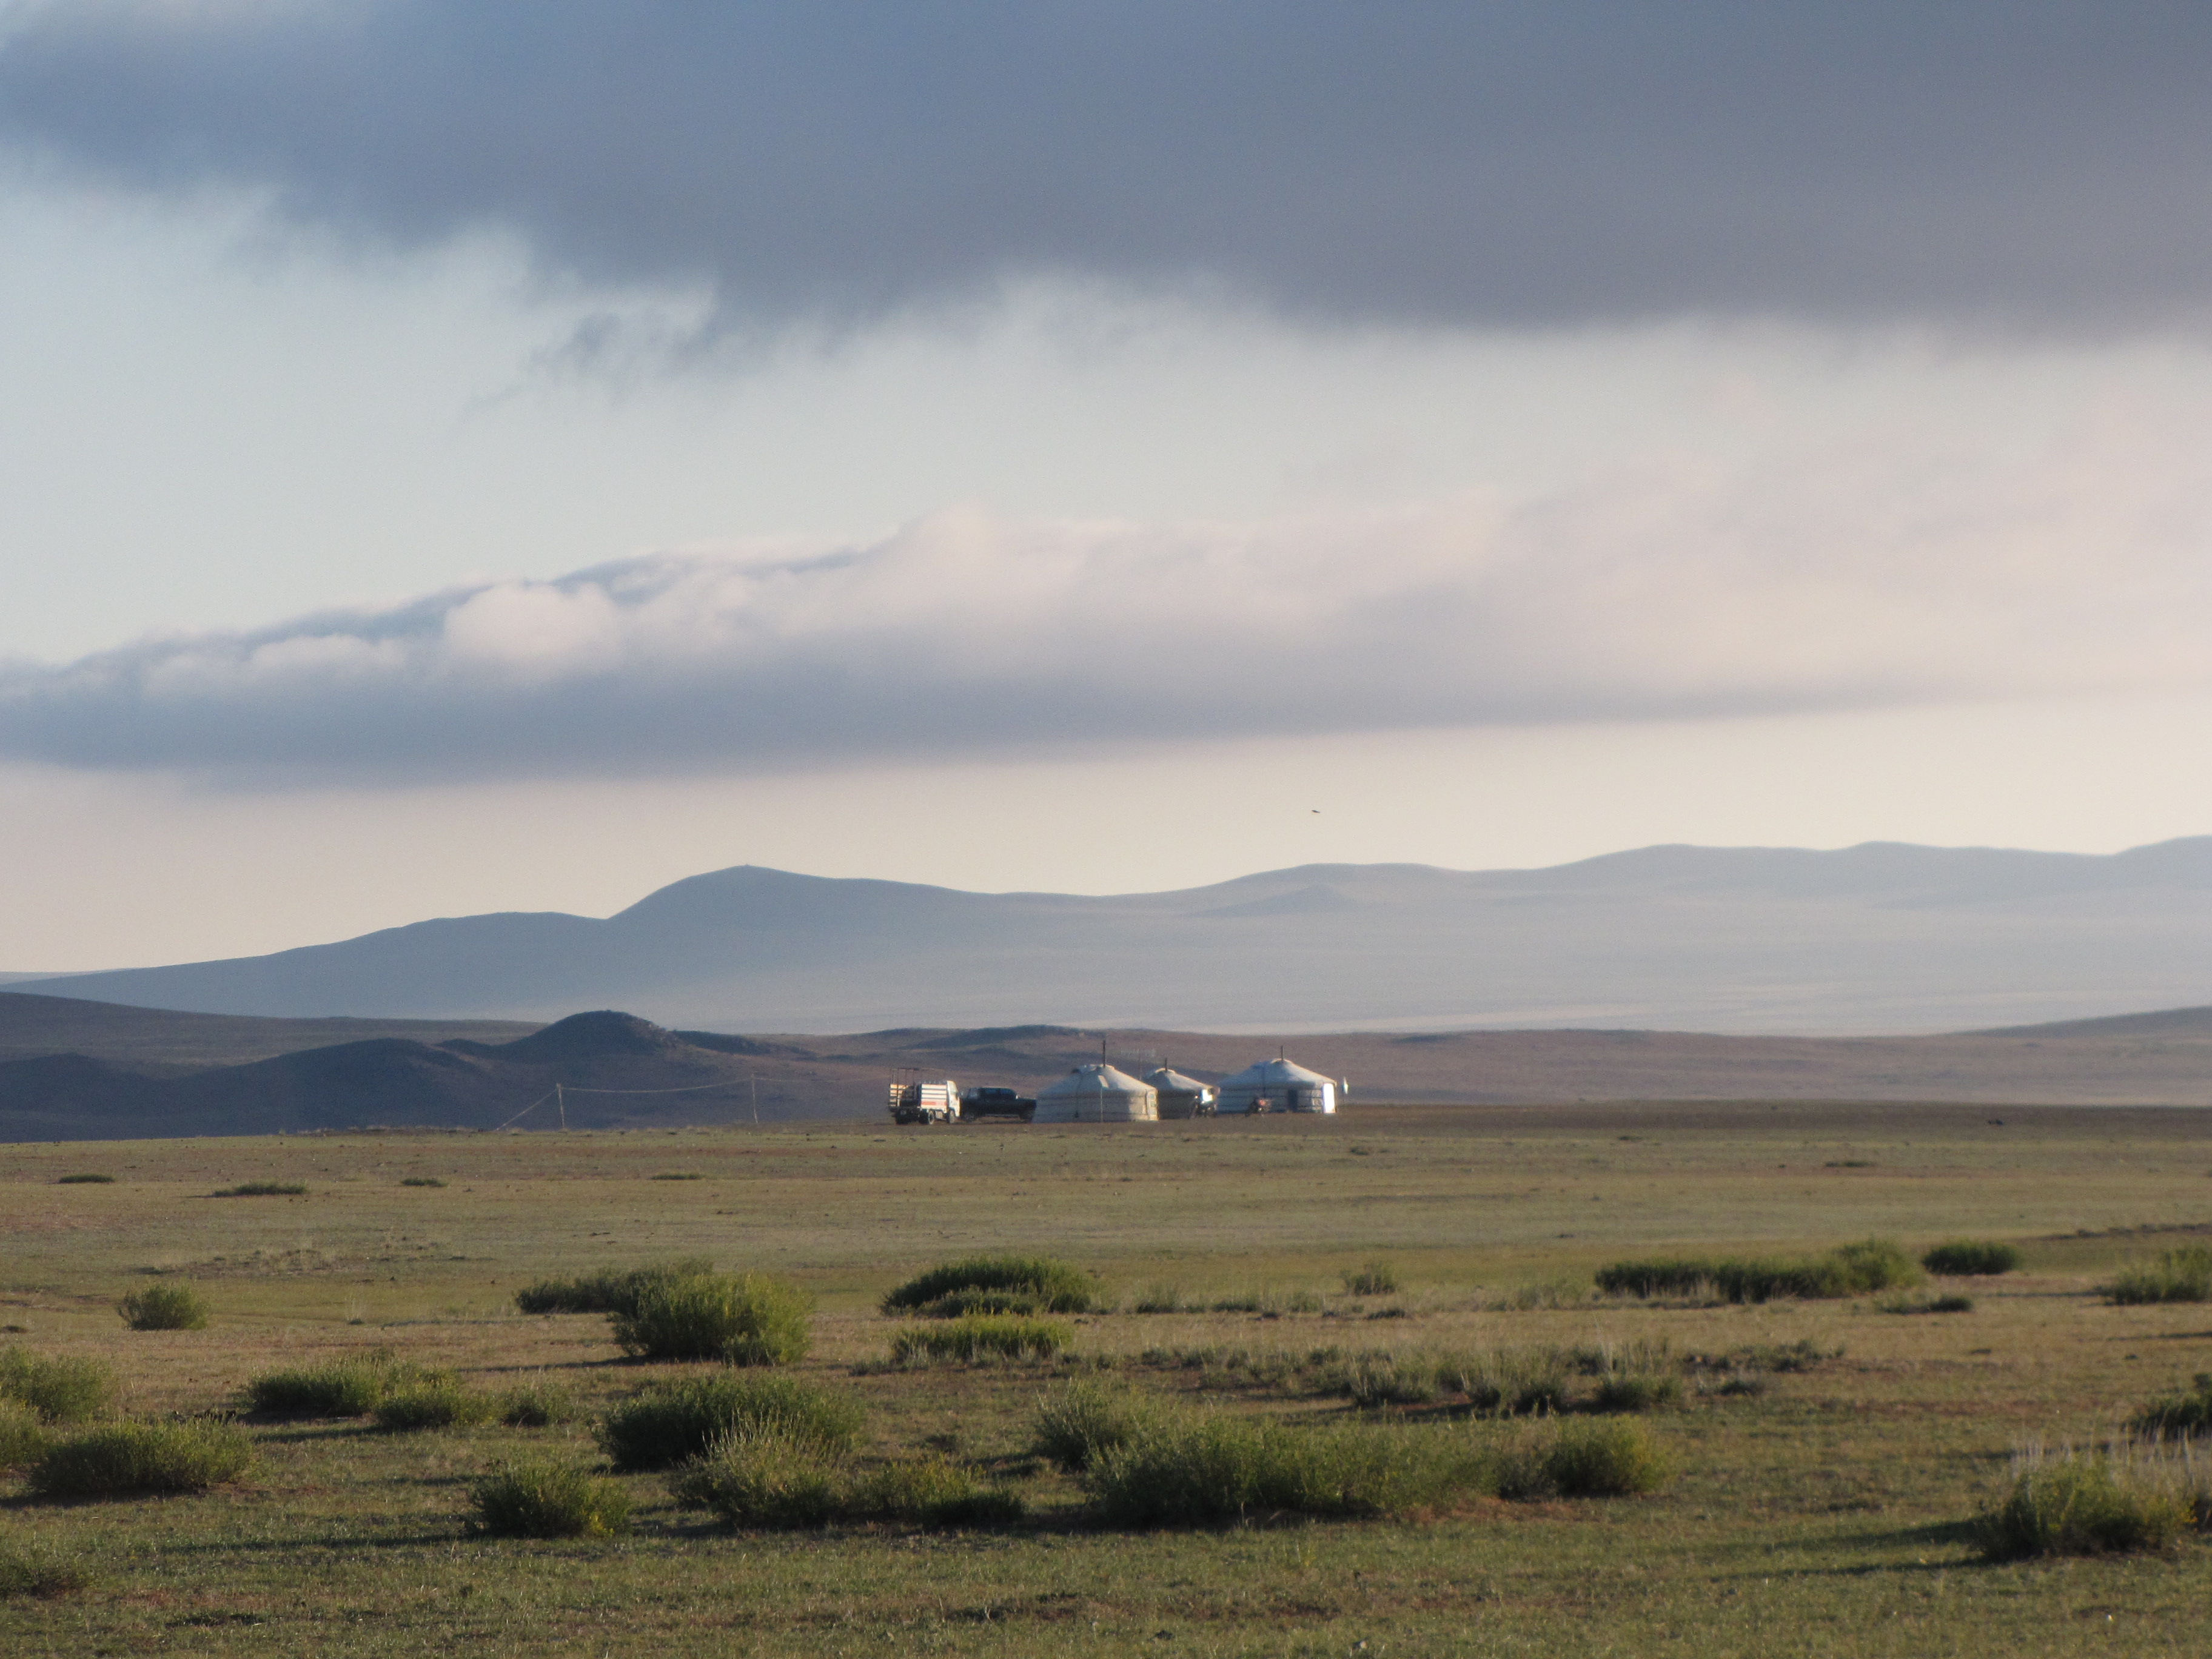 Mongolian gers in the wide open steppe landscape of Mongolia. This is the real Mongolia.